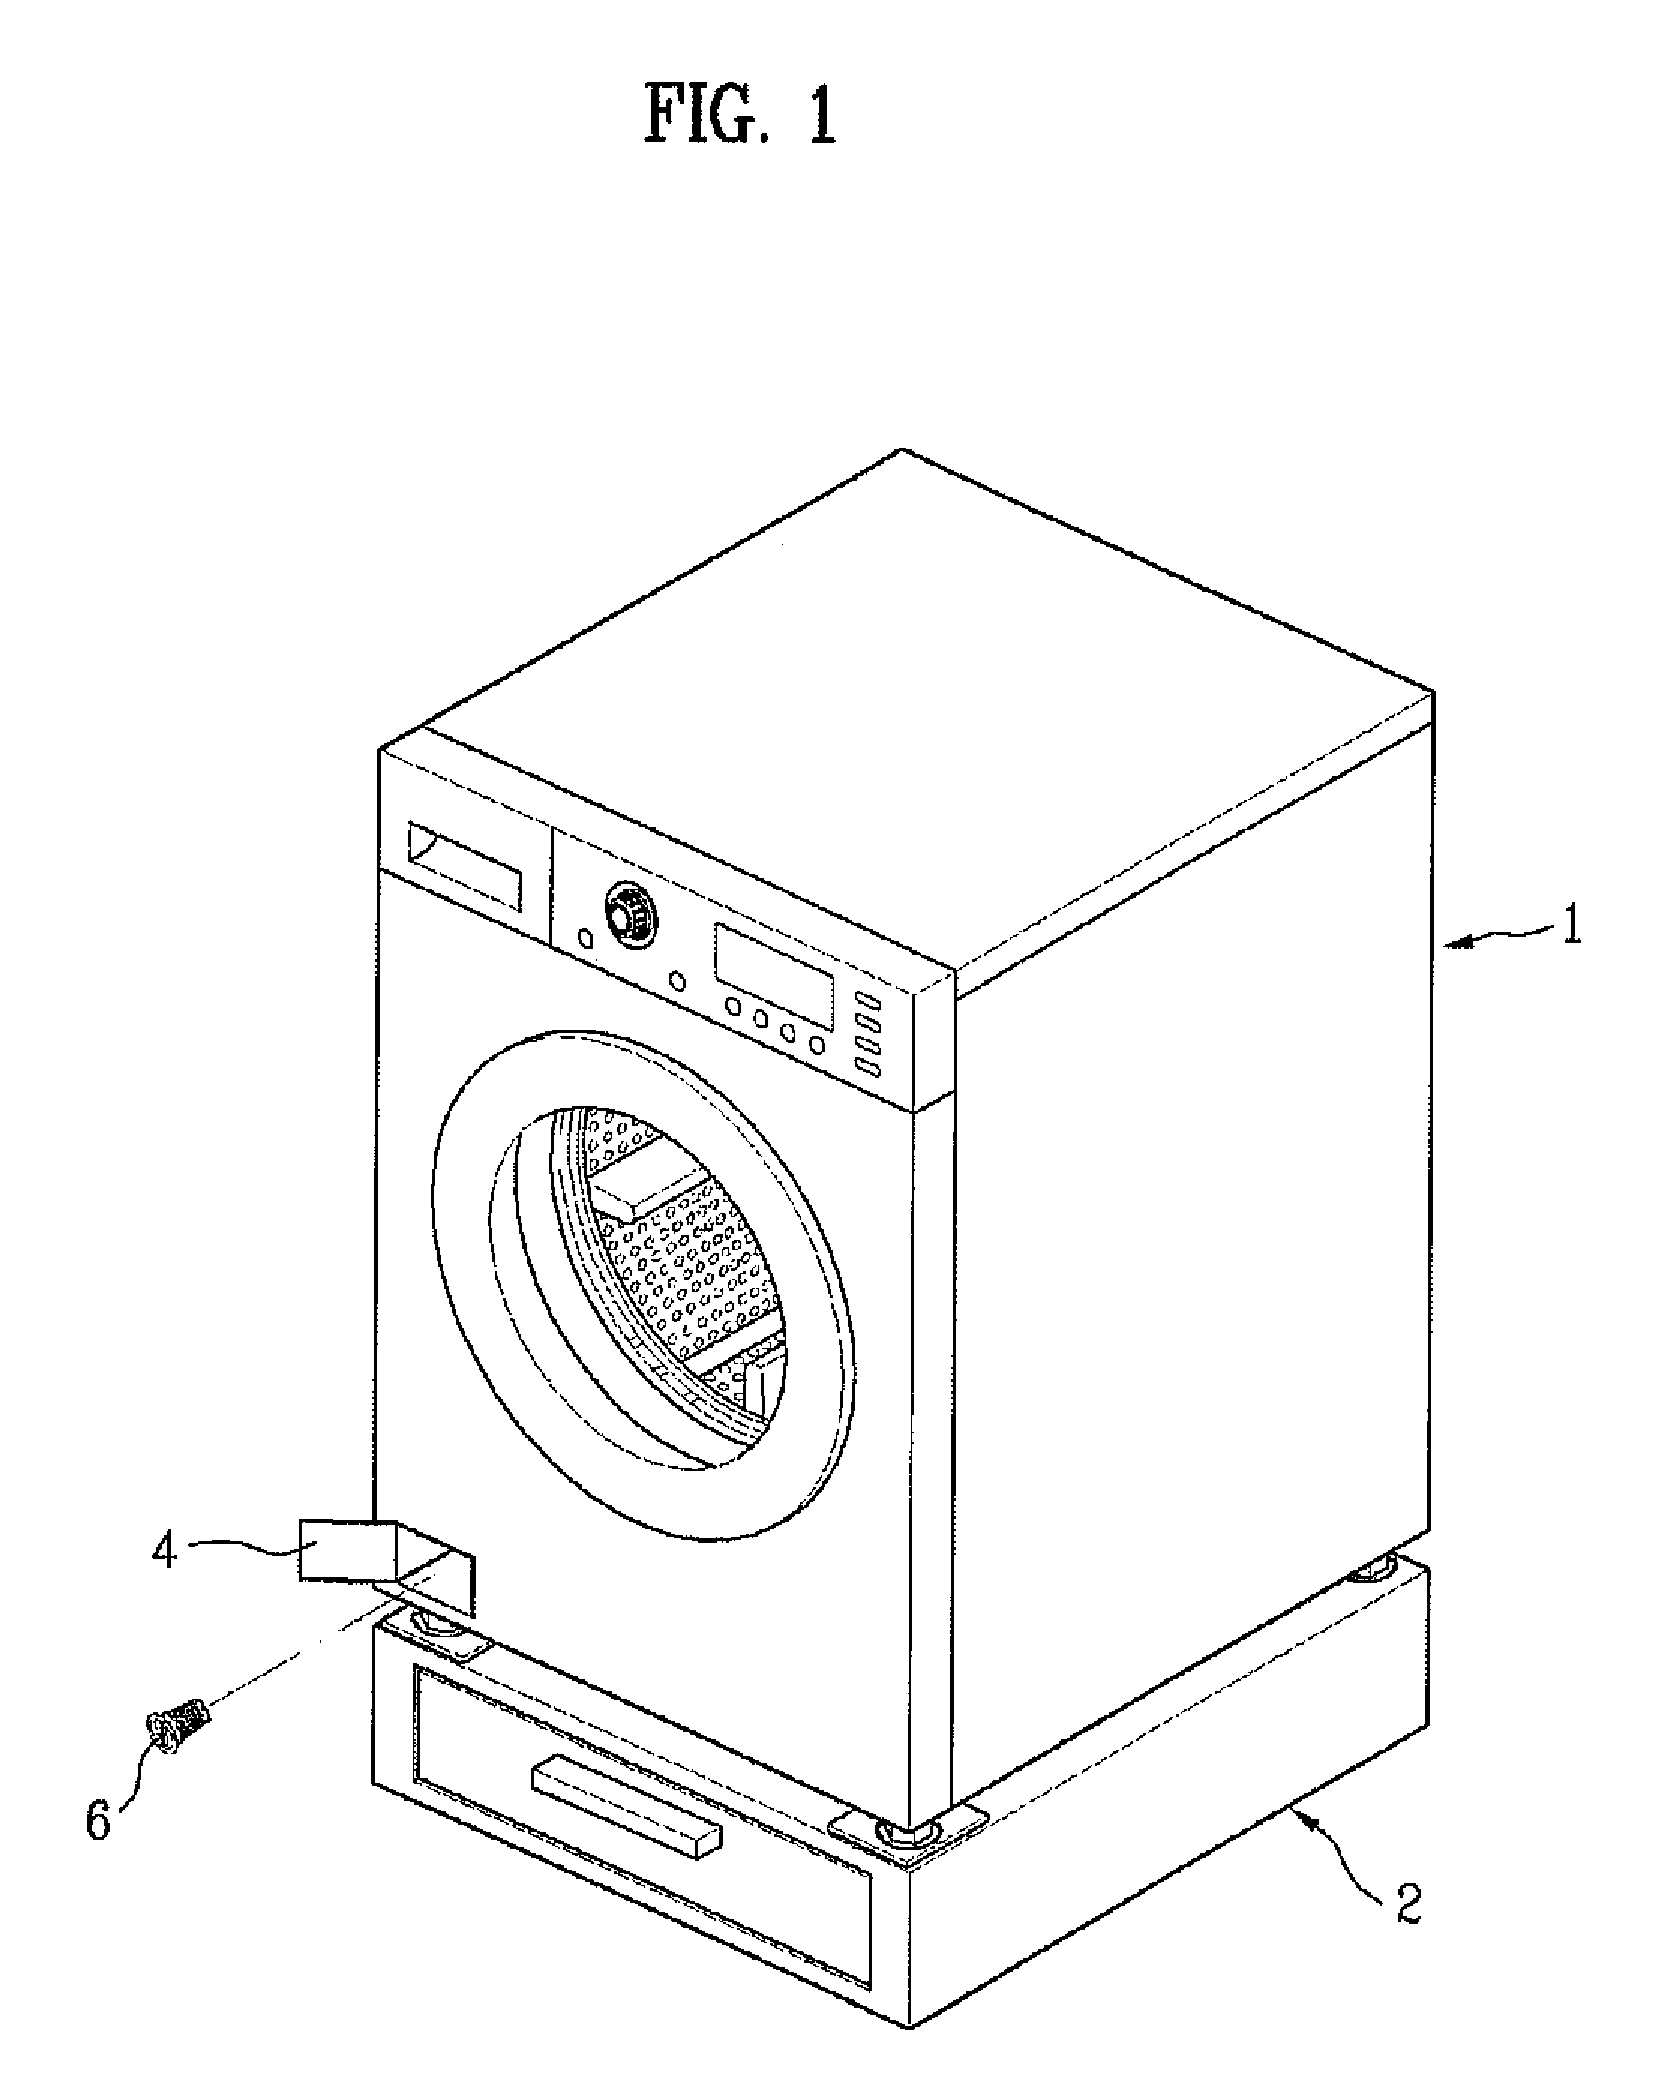 Laundry machine with height increasing member and drainage filter servicing section